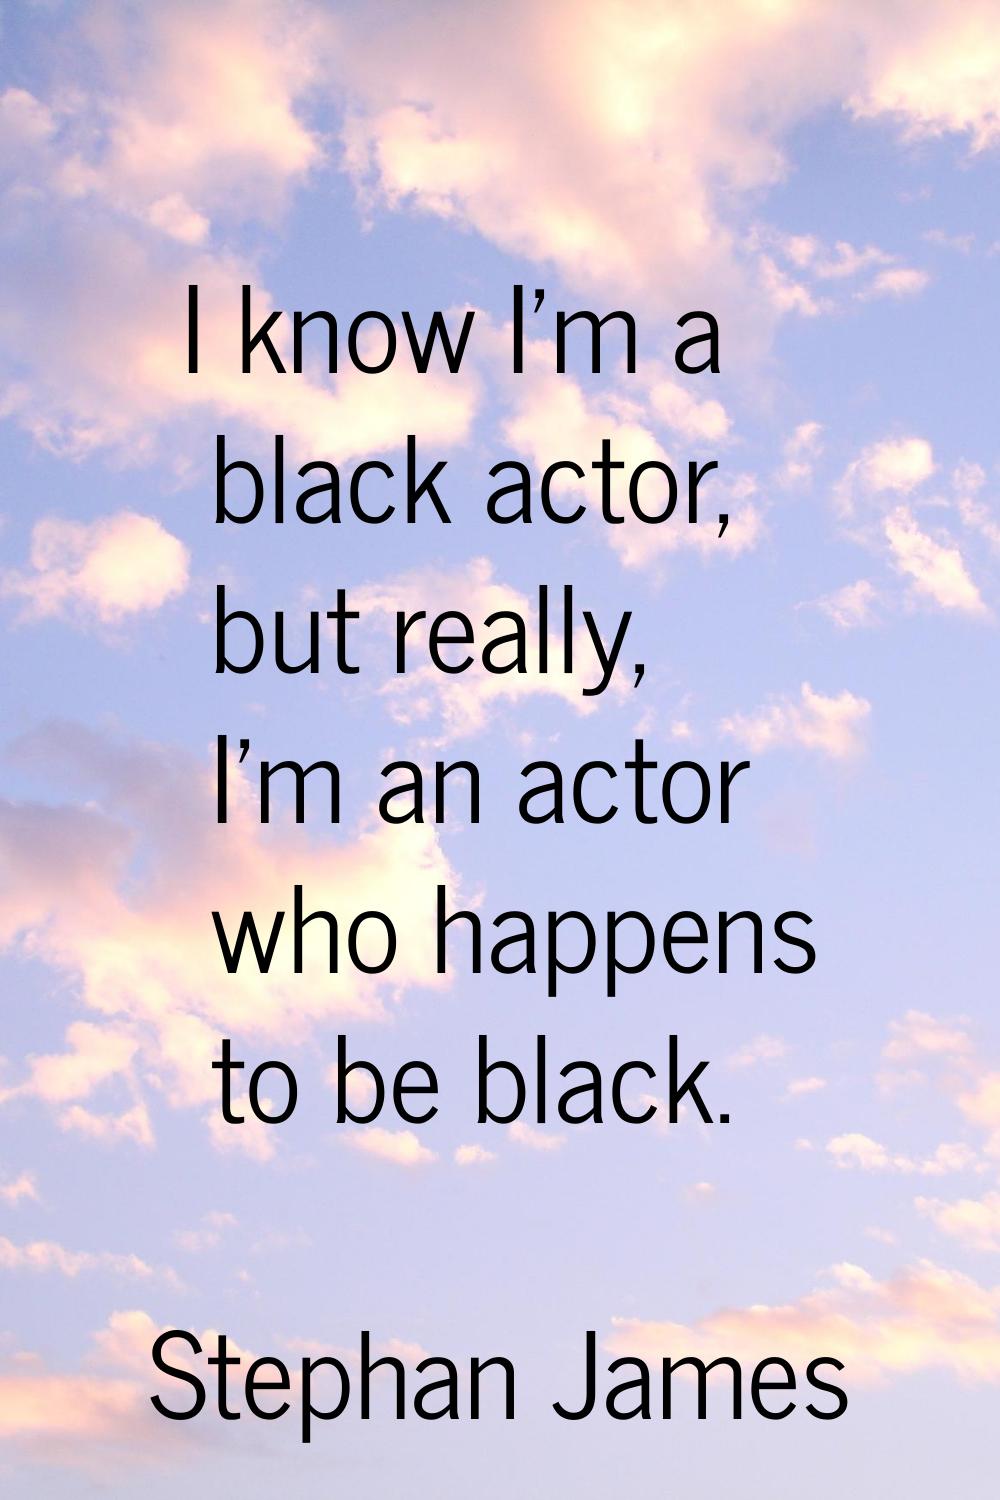 I know I'm a black actor, but really, I'm an actor who happens to be black.